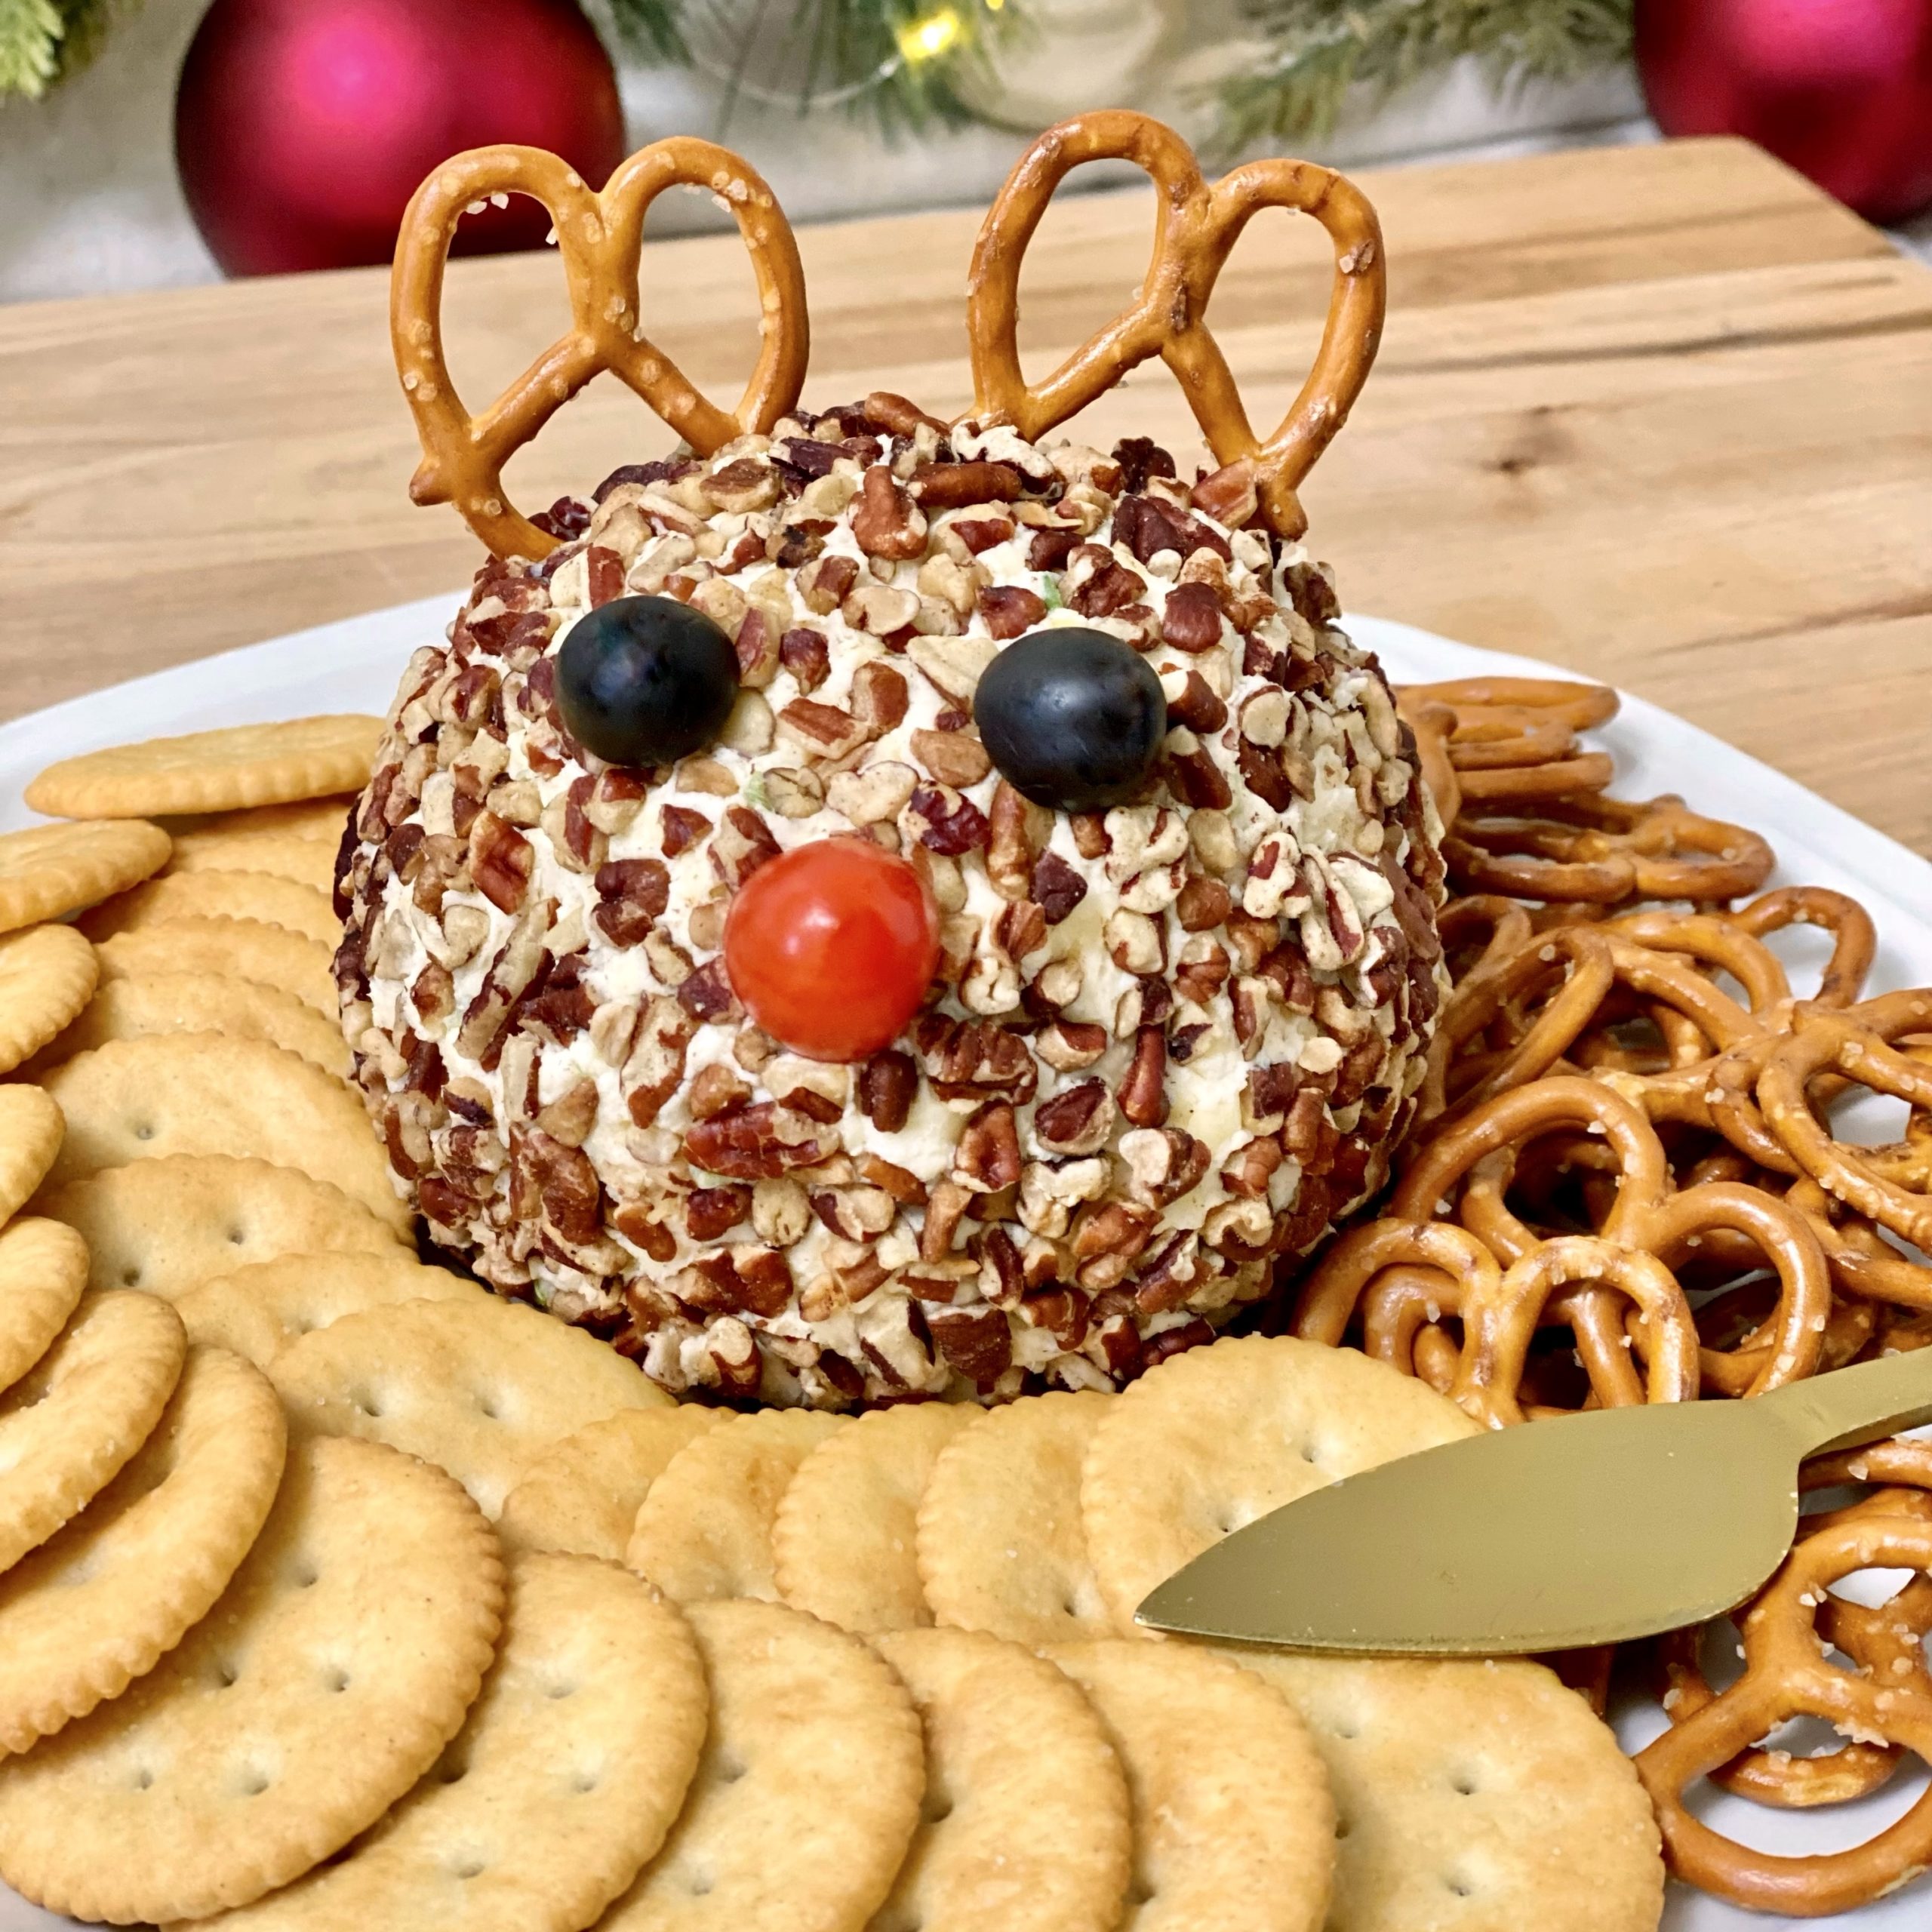 Rudolph Christmas Cheese Ball With crackers, pretzels, and a gold spreader with it on the plate.